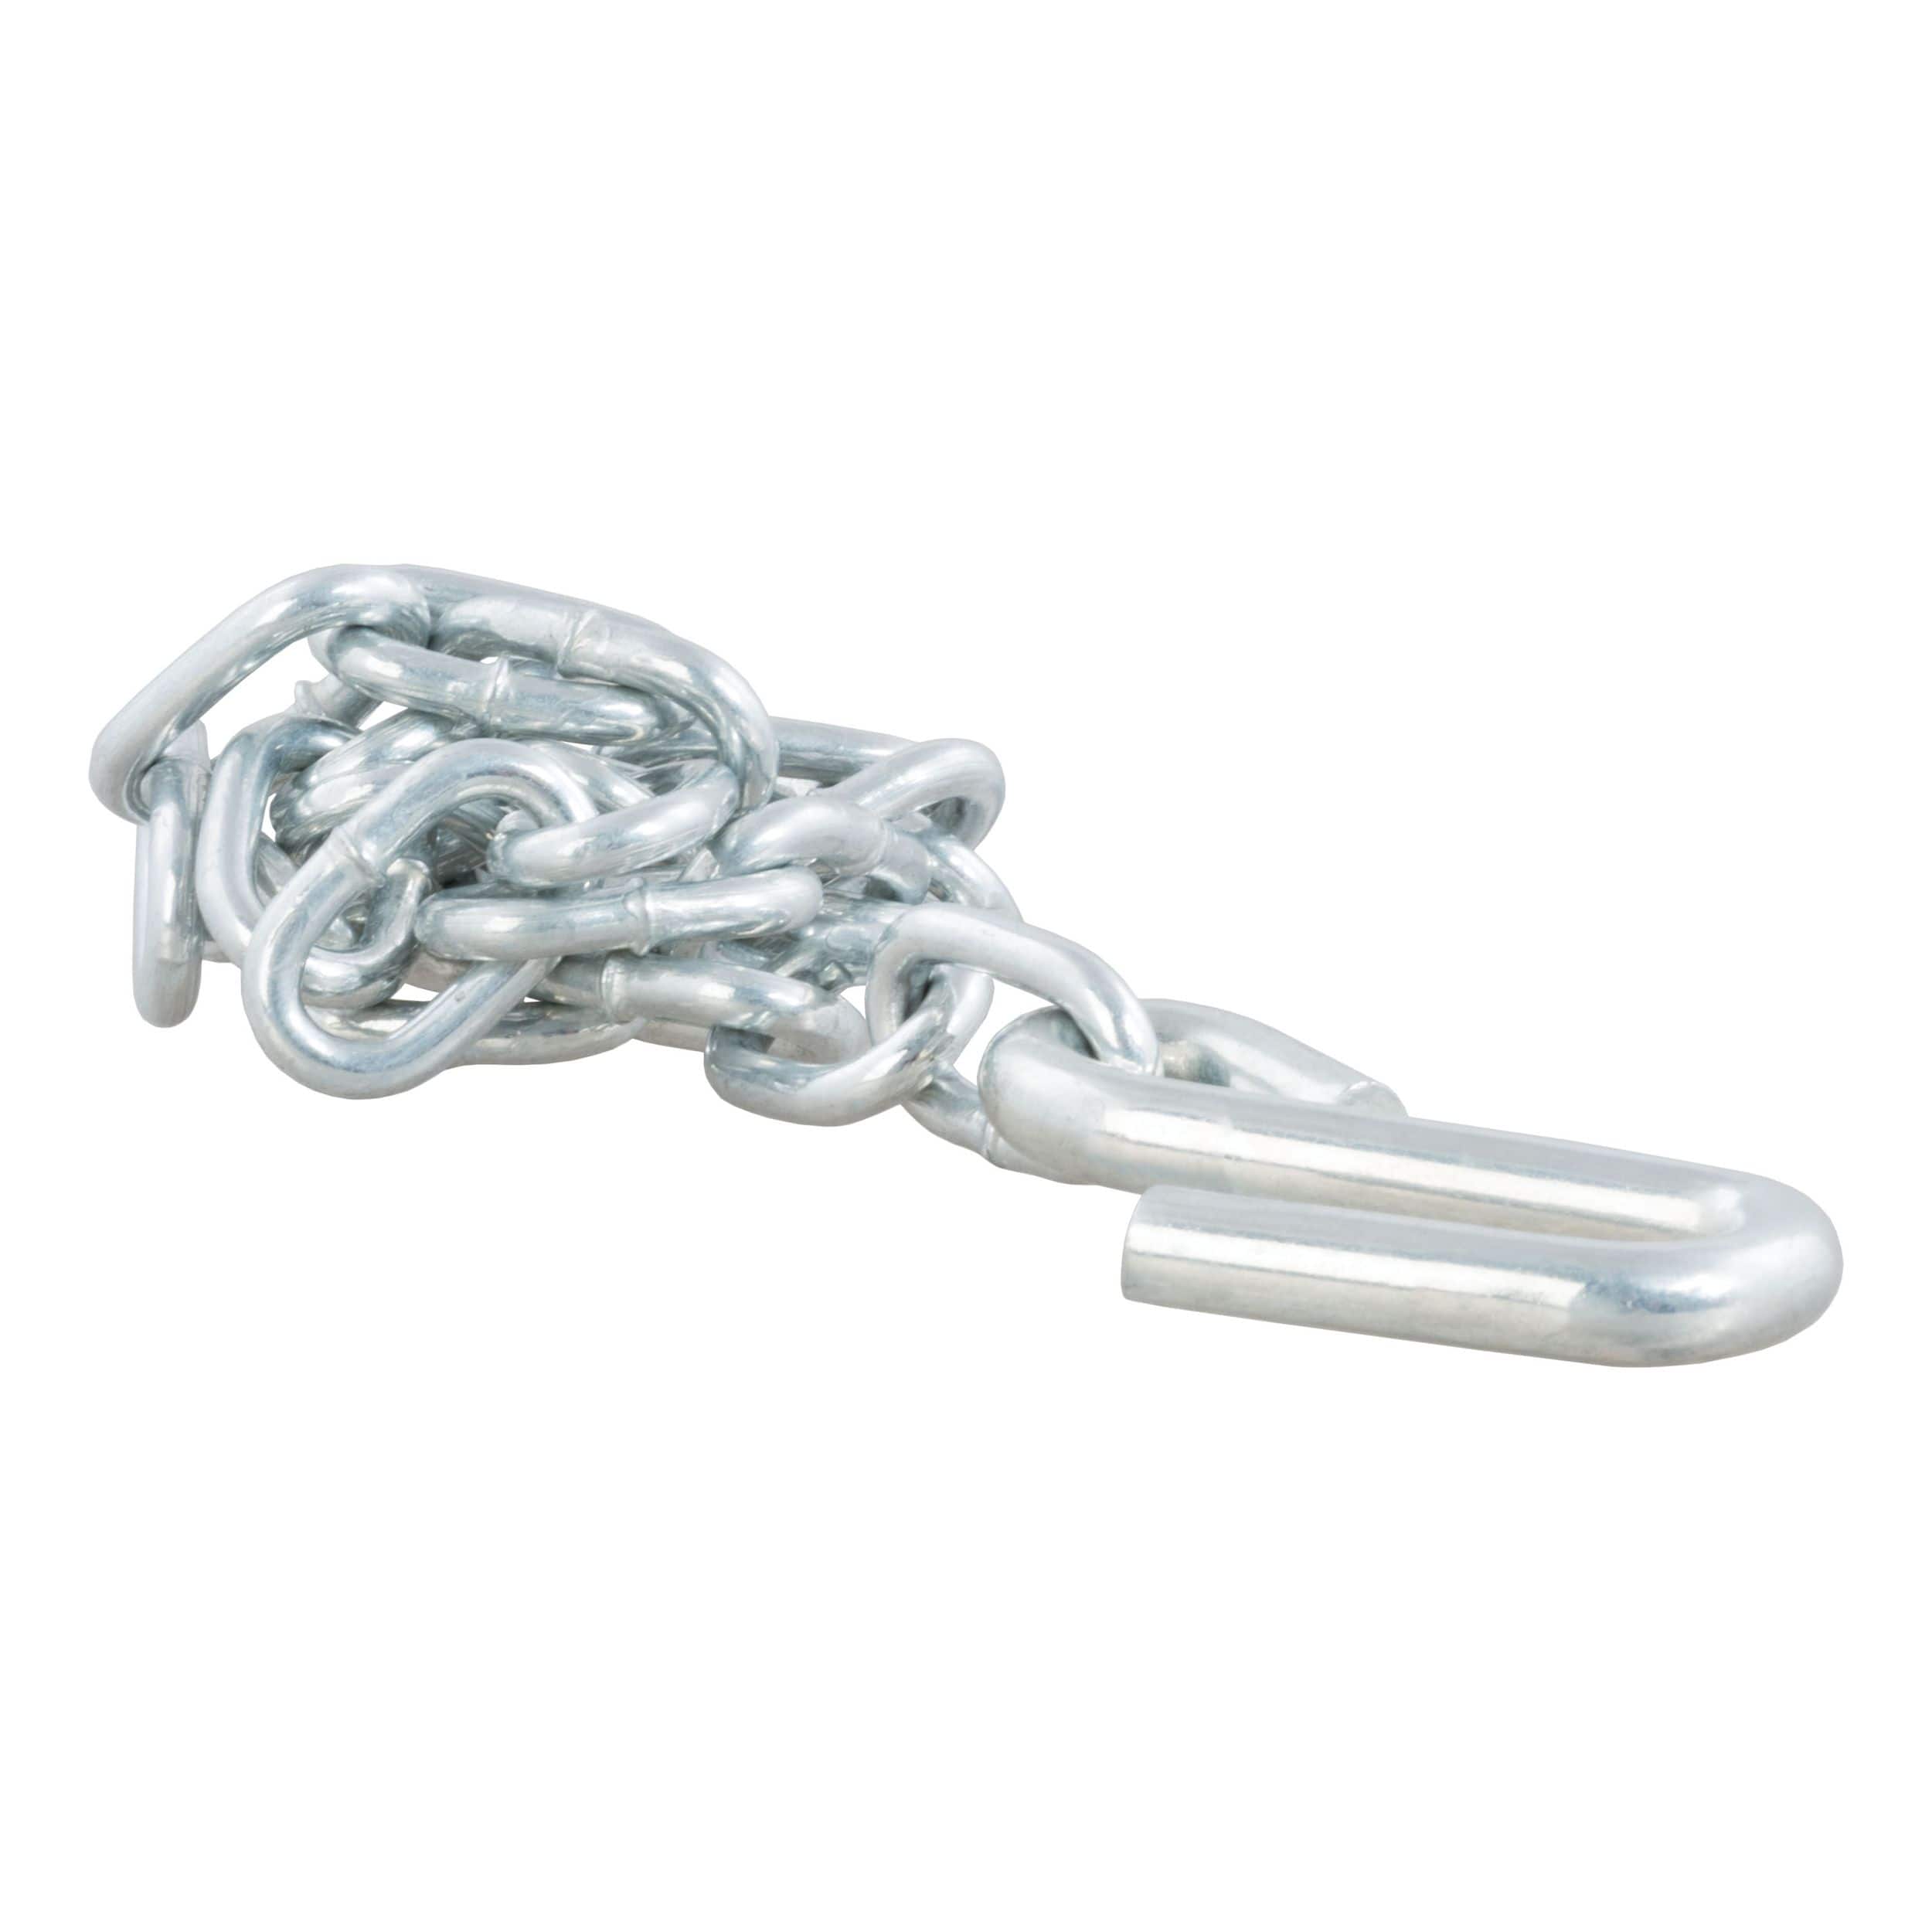 https://media-www.canadiantire.ca/product/automotive/automotive-outdoor-adventure/auto-travel-storage/1406227/27-safety-chain-with-1-s-hook-2-000-lbs-clear-zinc--156bb2ee-ef07-41a2-9264-a0c184b87081-jpgrendition.jpg